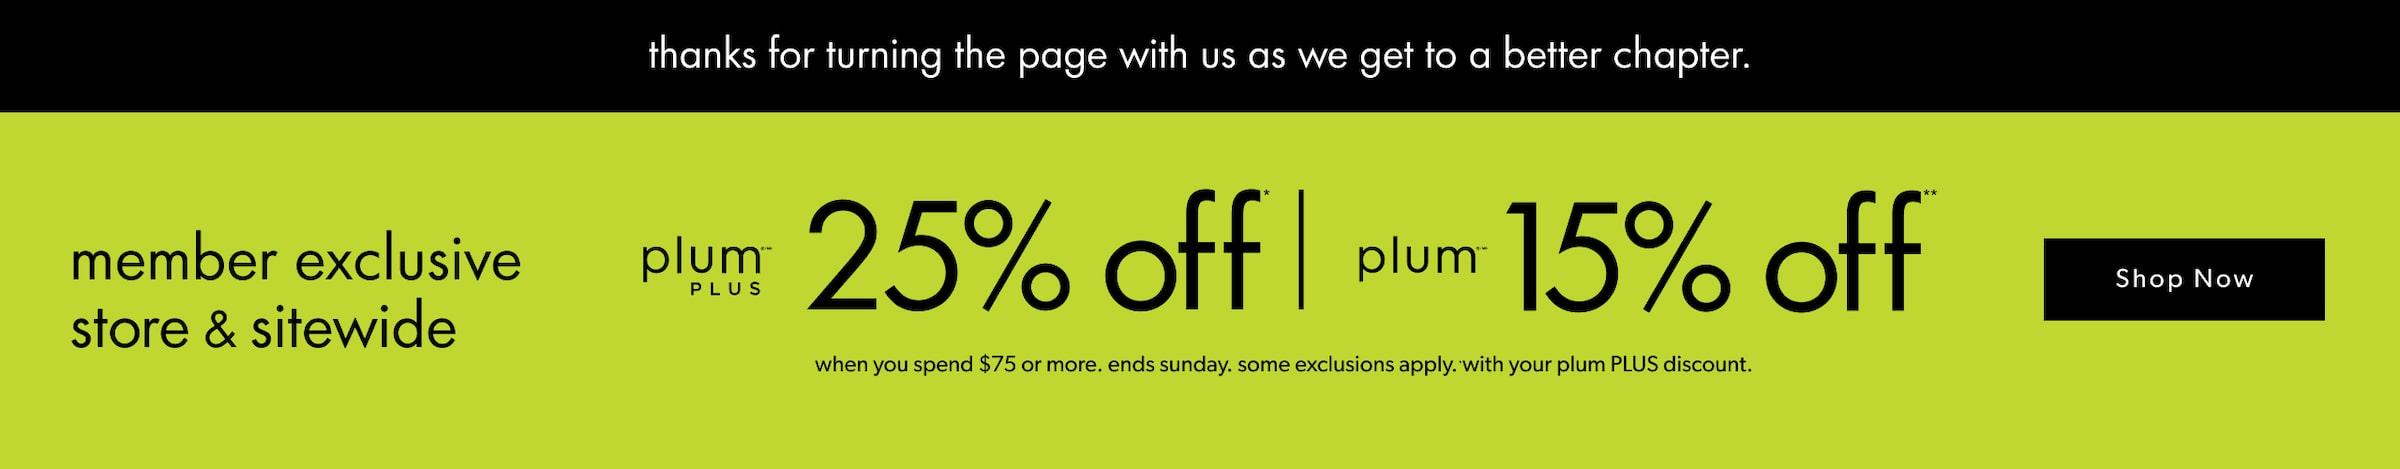 Banner reads: 25% off for plum plus, 15% off for plum. Sitewide & storewide when you spend $75 or more.